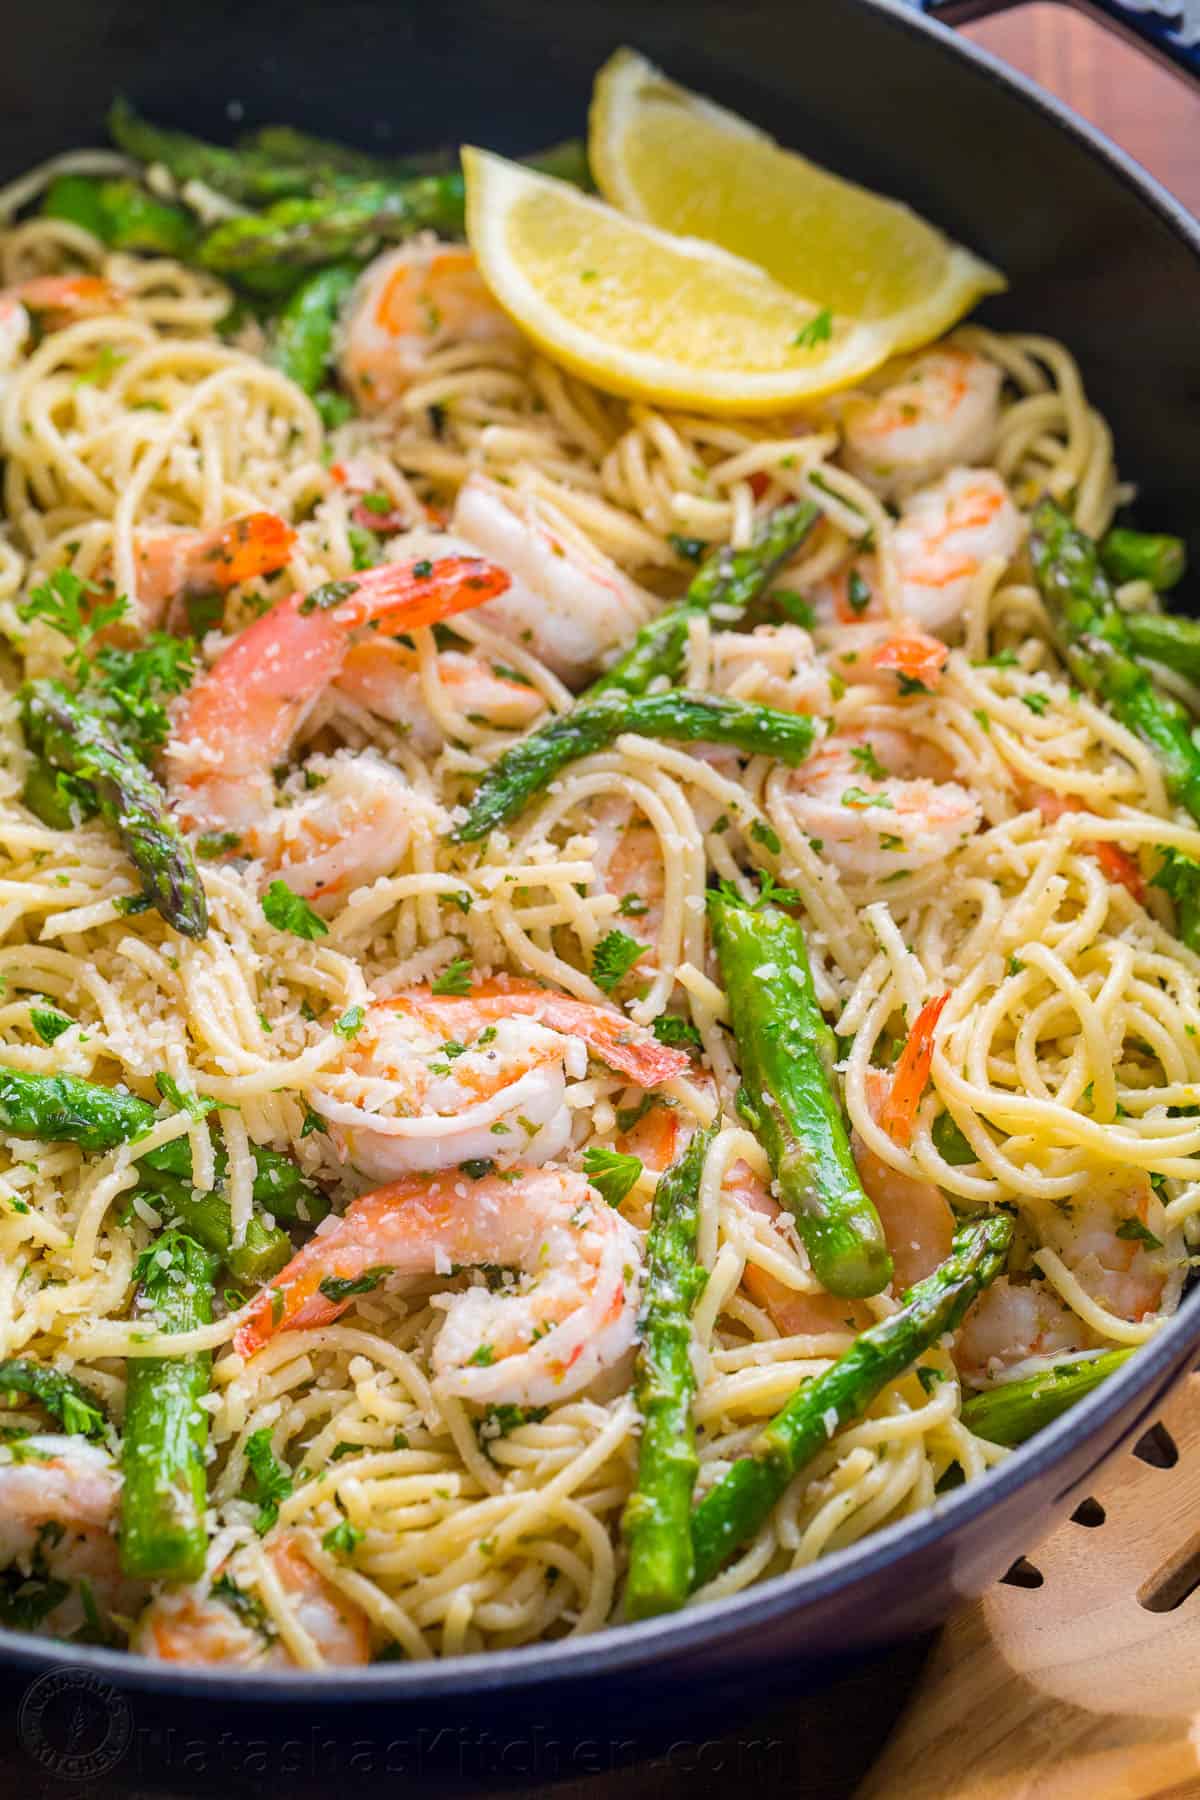 Shrimp scampi pasta garnished with cheese and parsley and lemon wedges